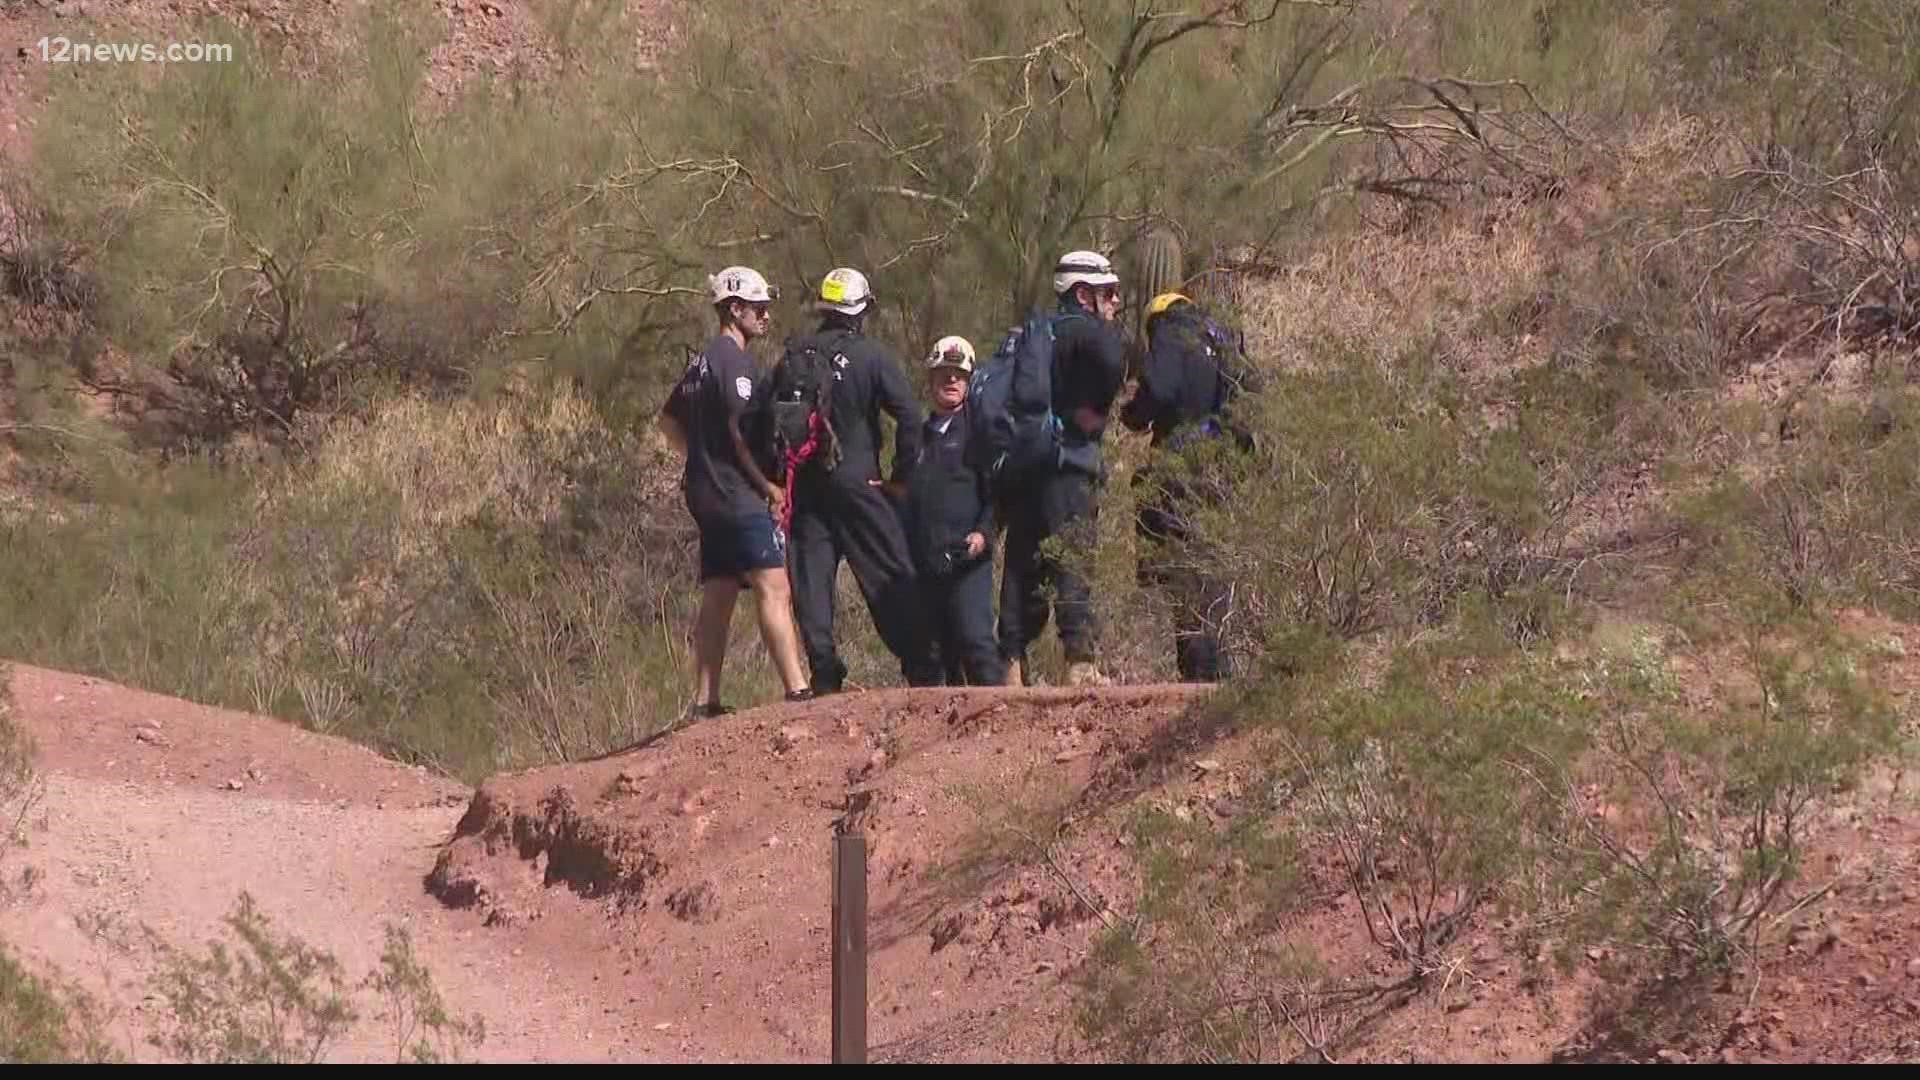 A missing hiker was found dead Friday afternoon after she disappeared during a hike on Camelback Mountain.